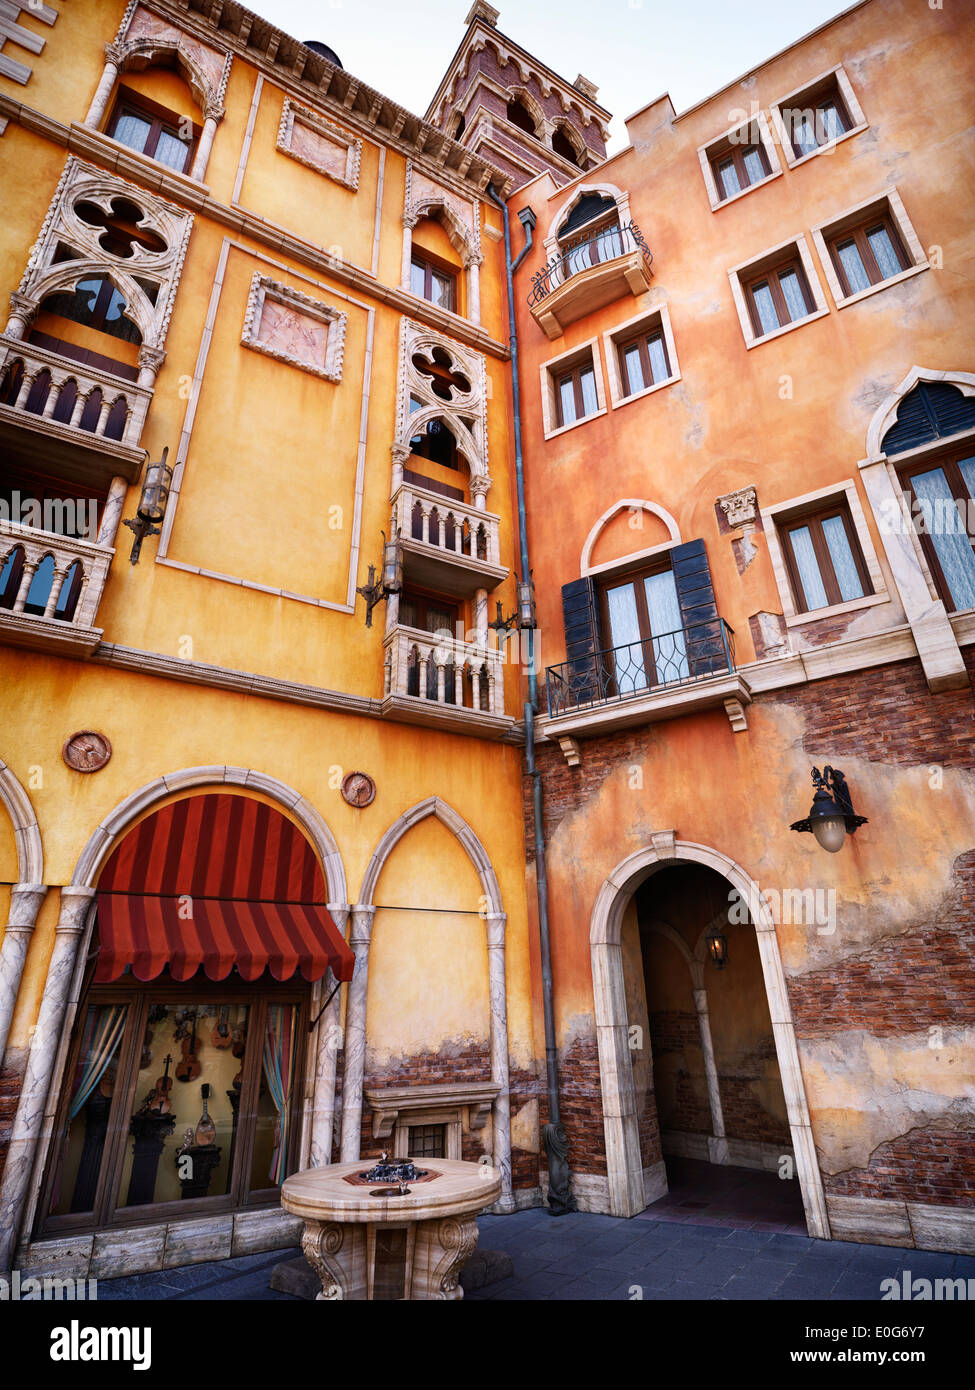 Corner between two buildings in Venetian gothic architectural style. Stock Photo